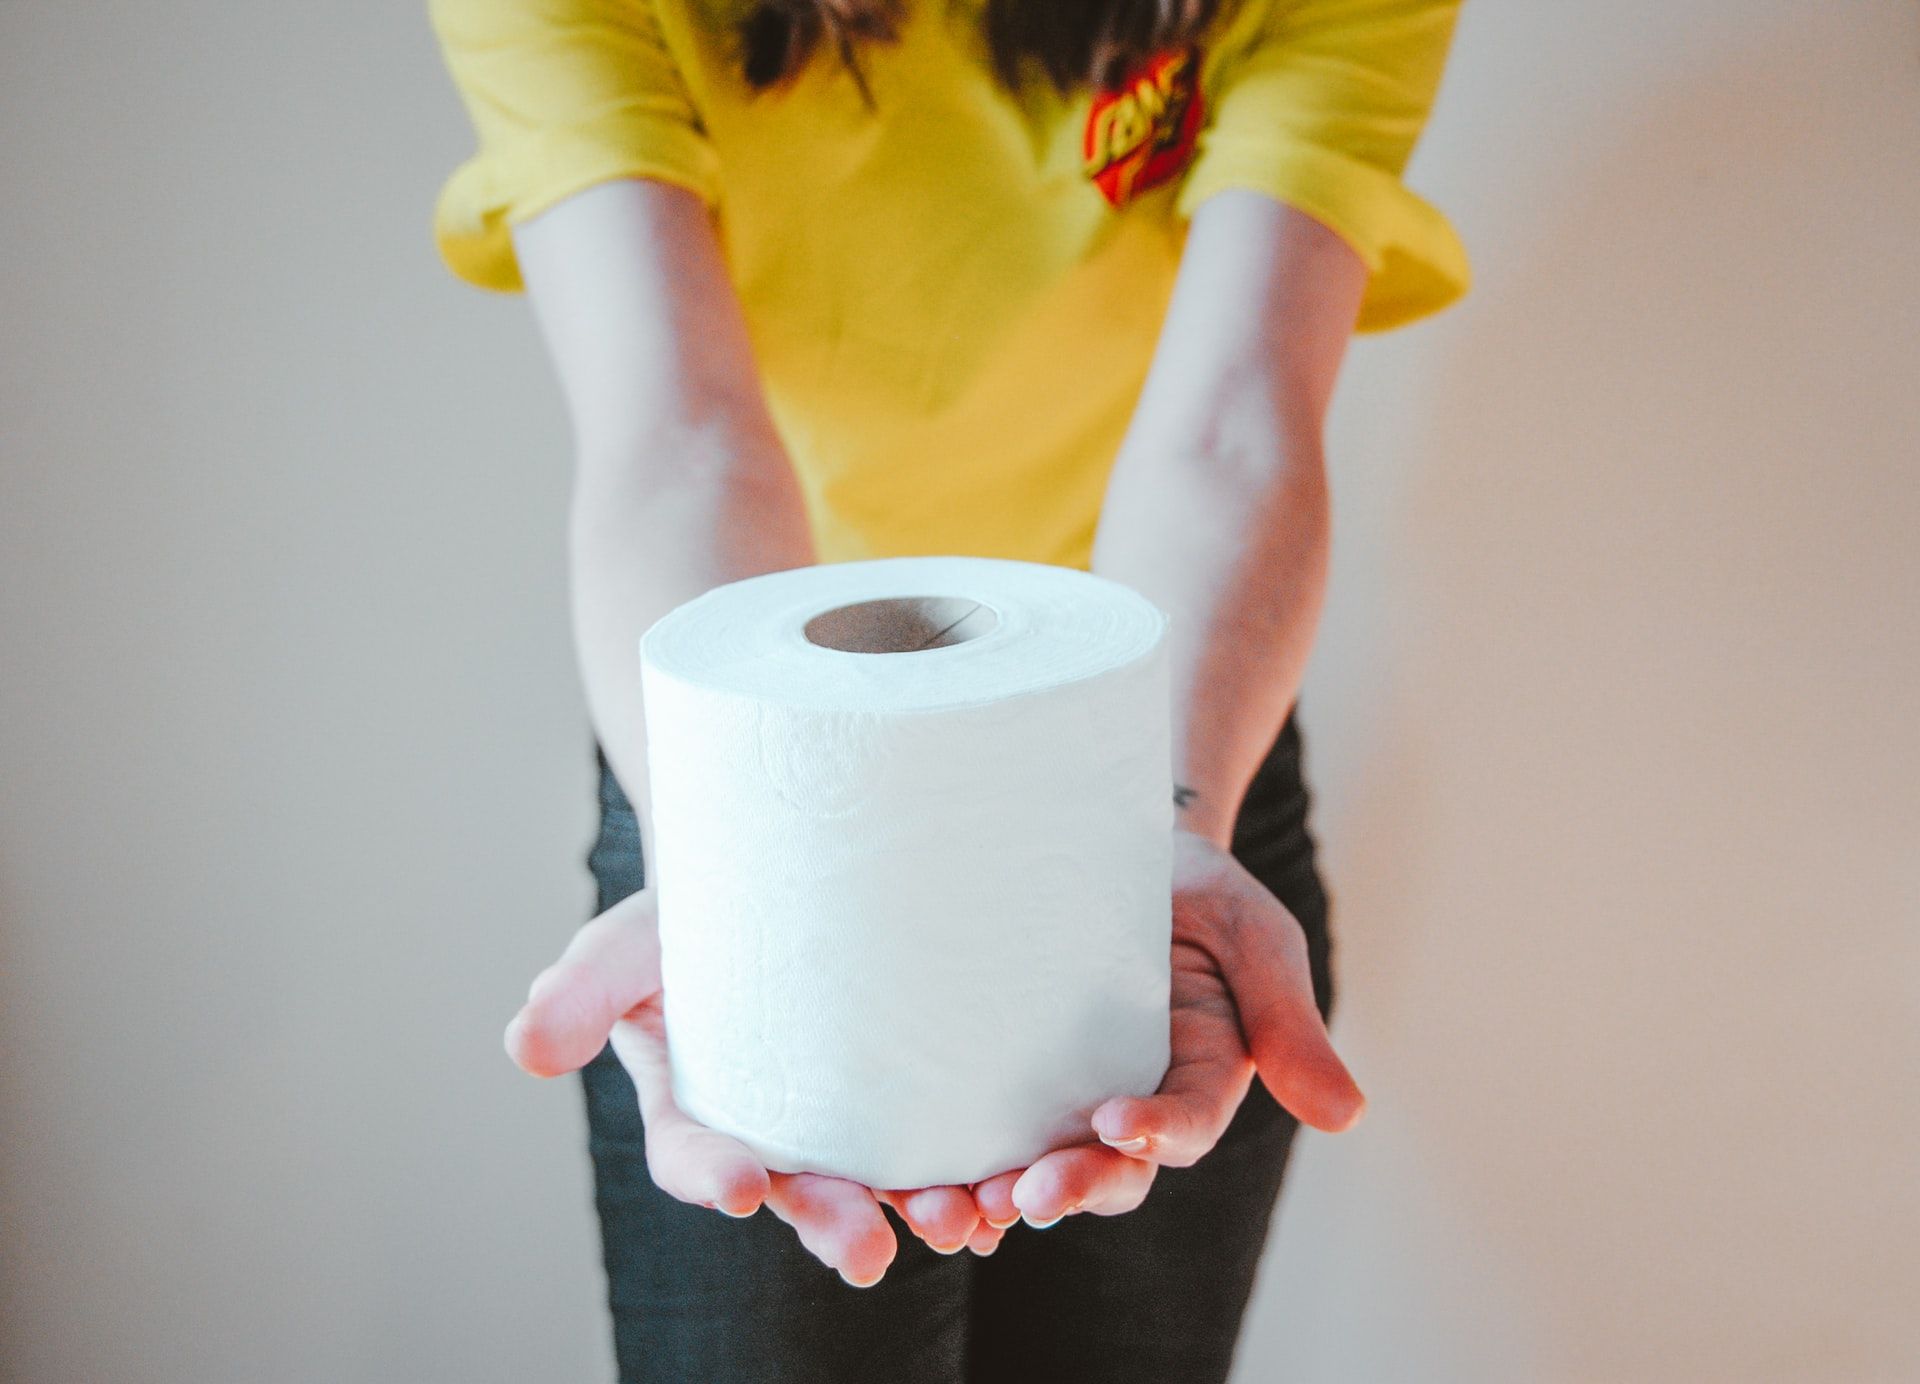 woman holding toilet paper